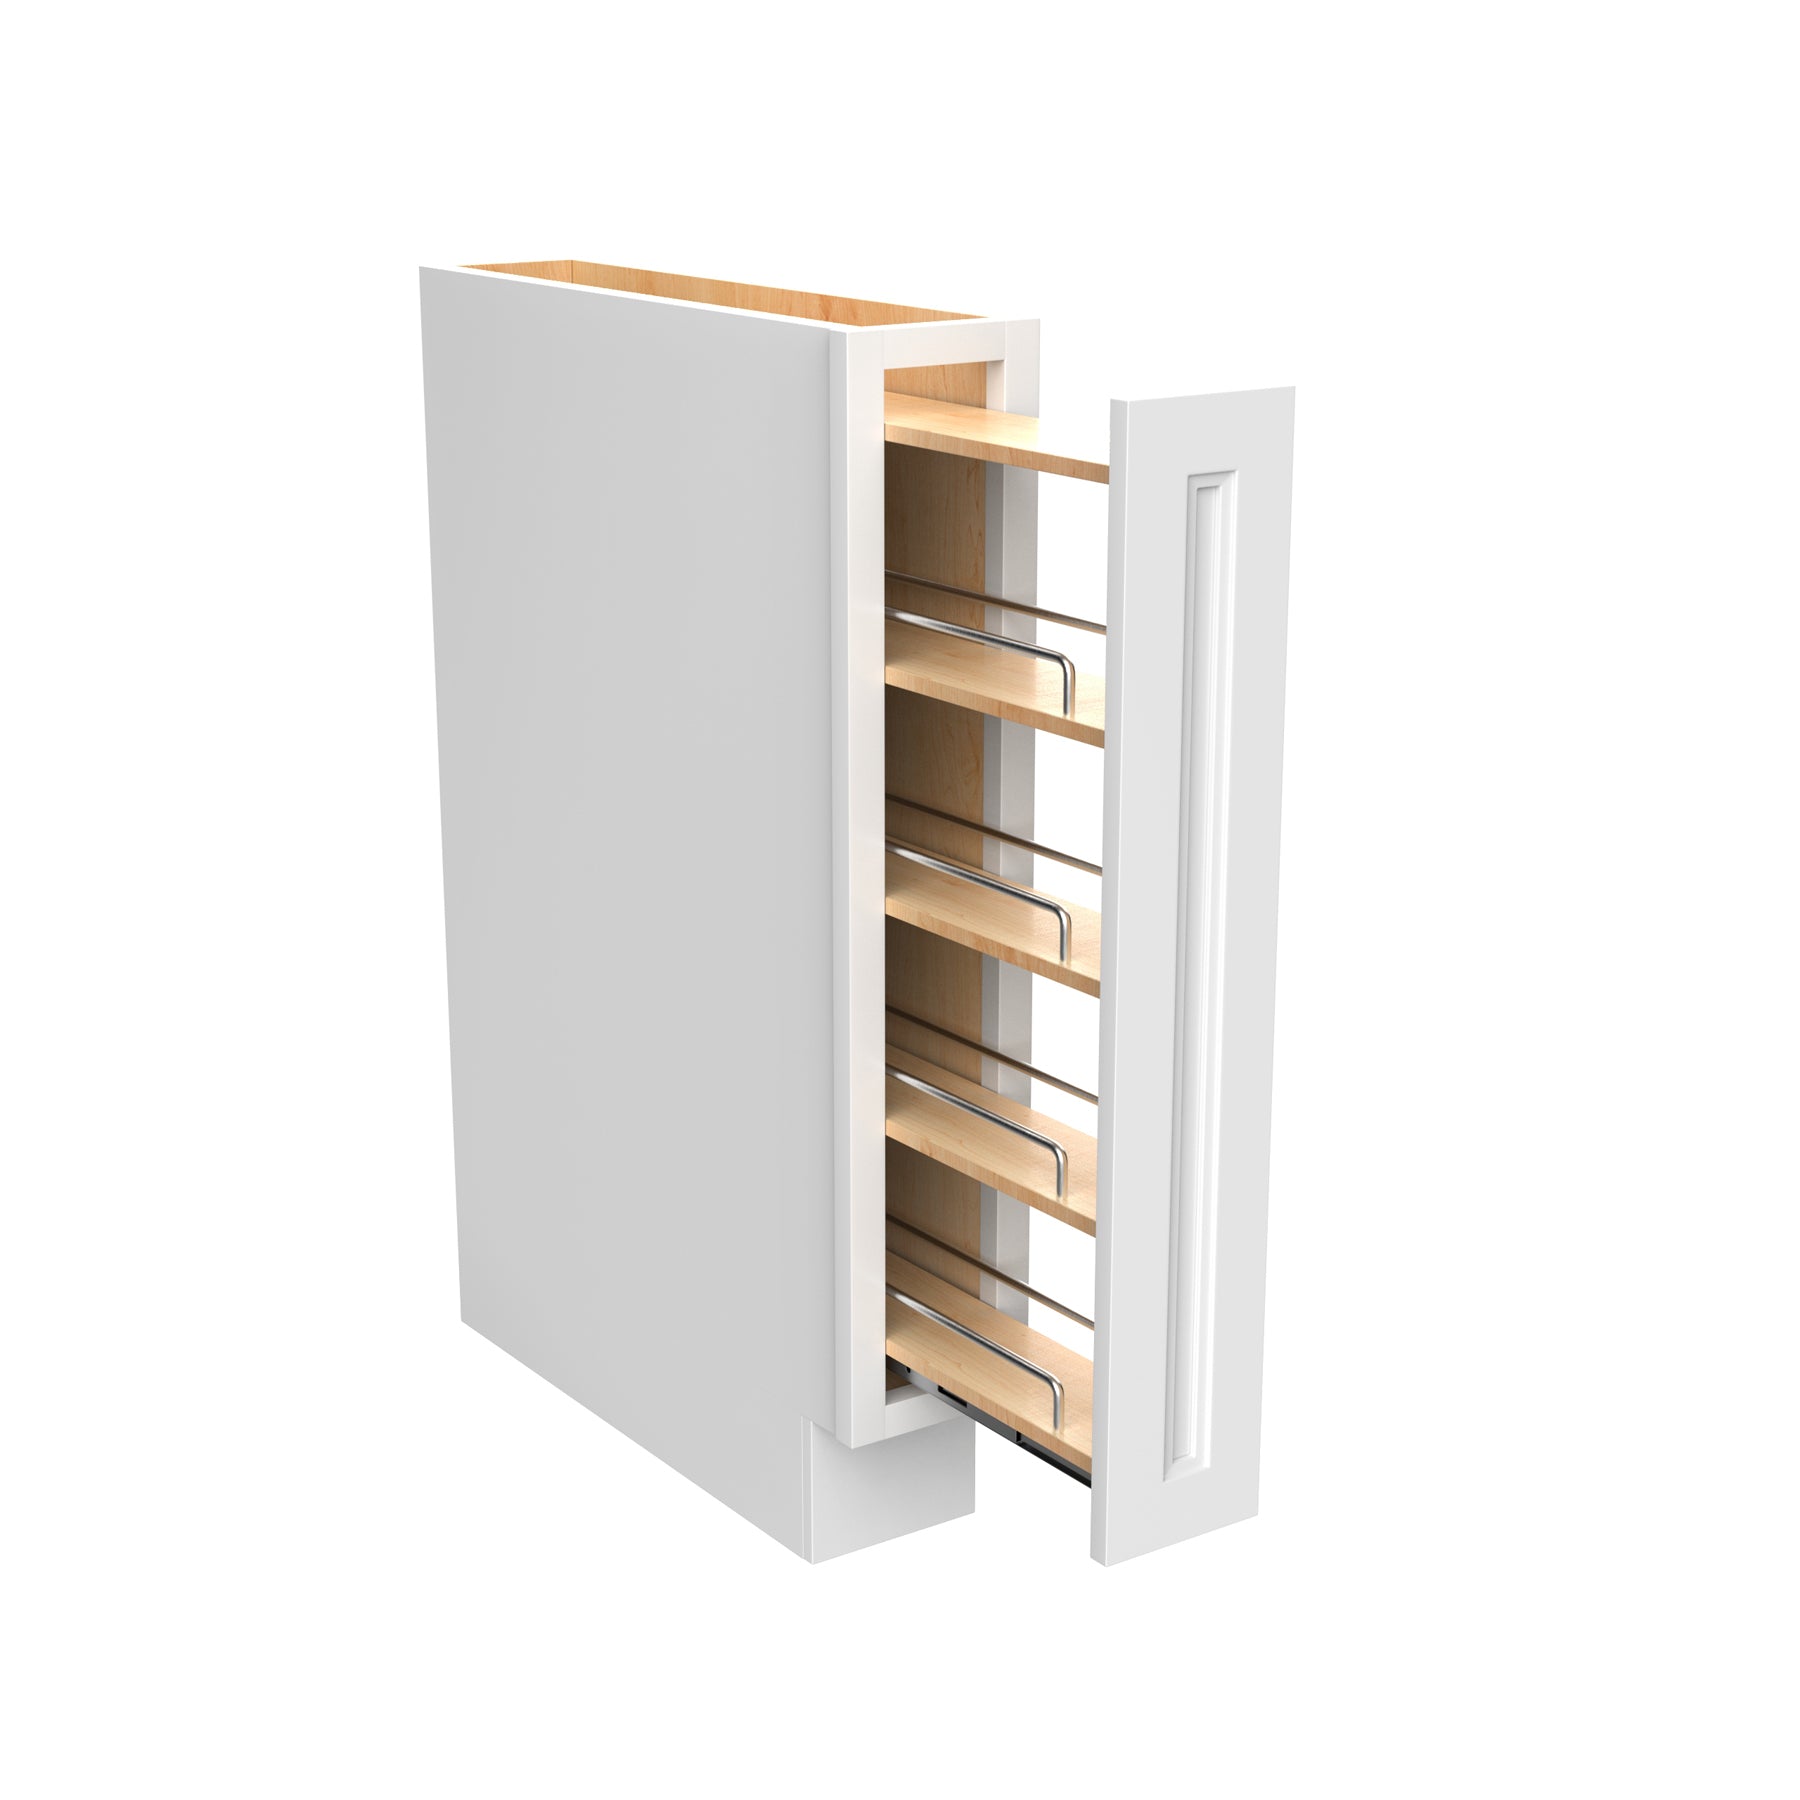 Spice Rack for Cabinet - Pull Out Spice Rack with 5 Year Limited Warranty 